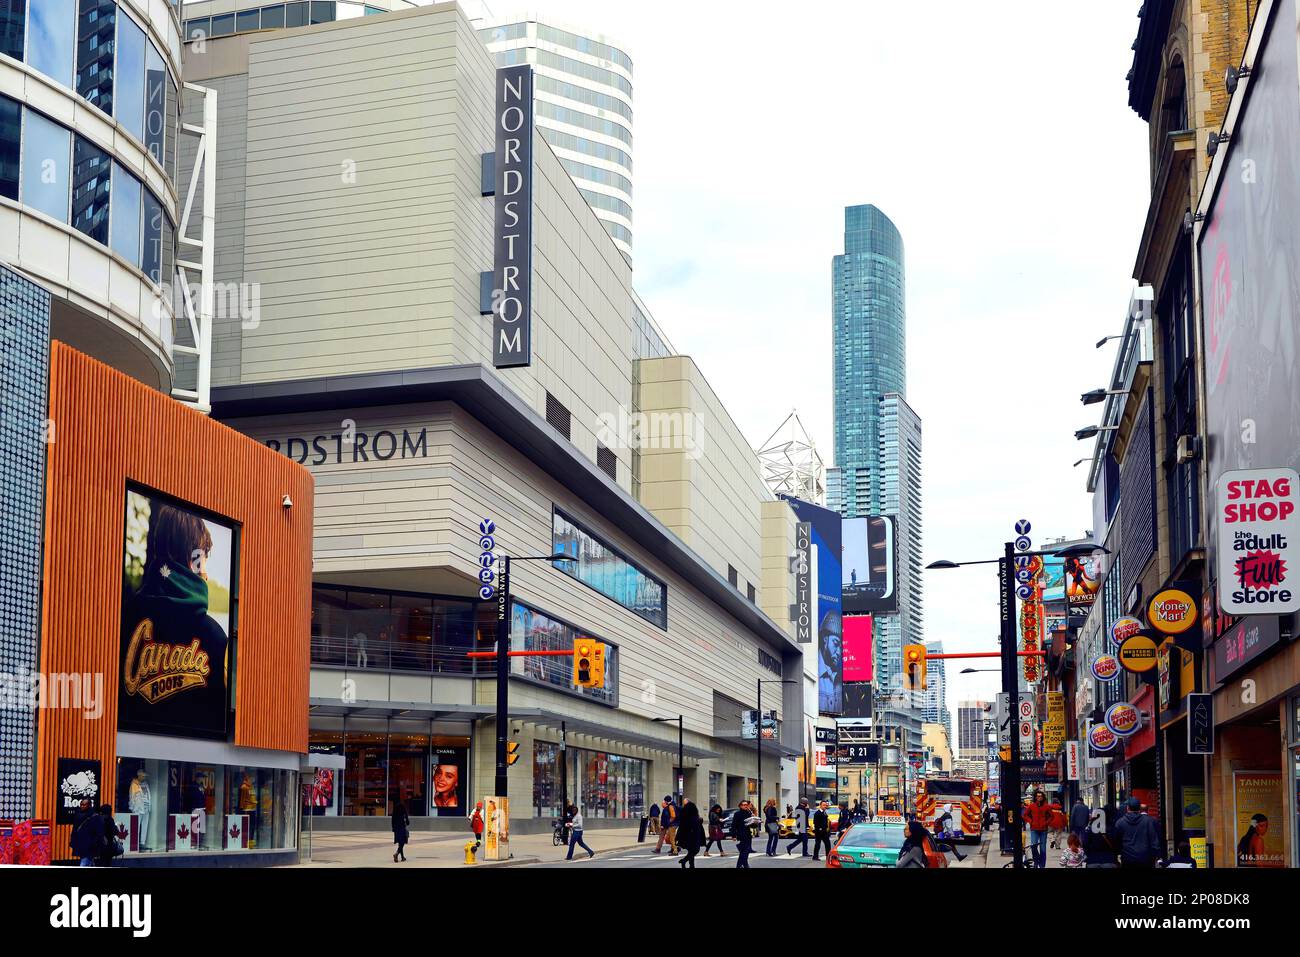 Toronto, Canada - March 29, 2017:  Section of Yonge Street featuring the Nordstrom store, now the anchor store in the Eaton Centre.  It was originally Stock Photo